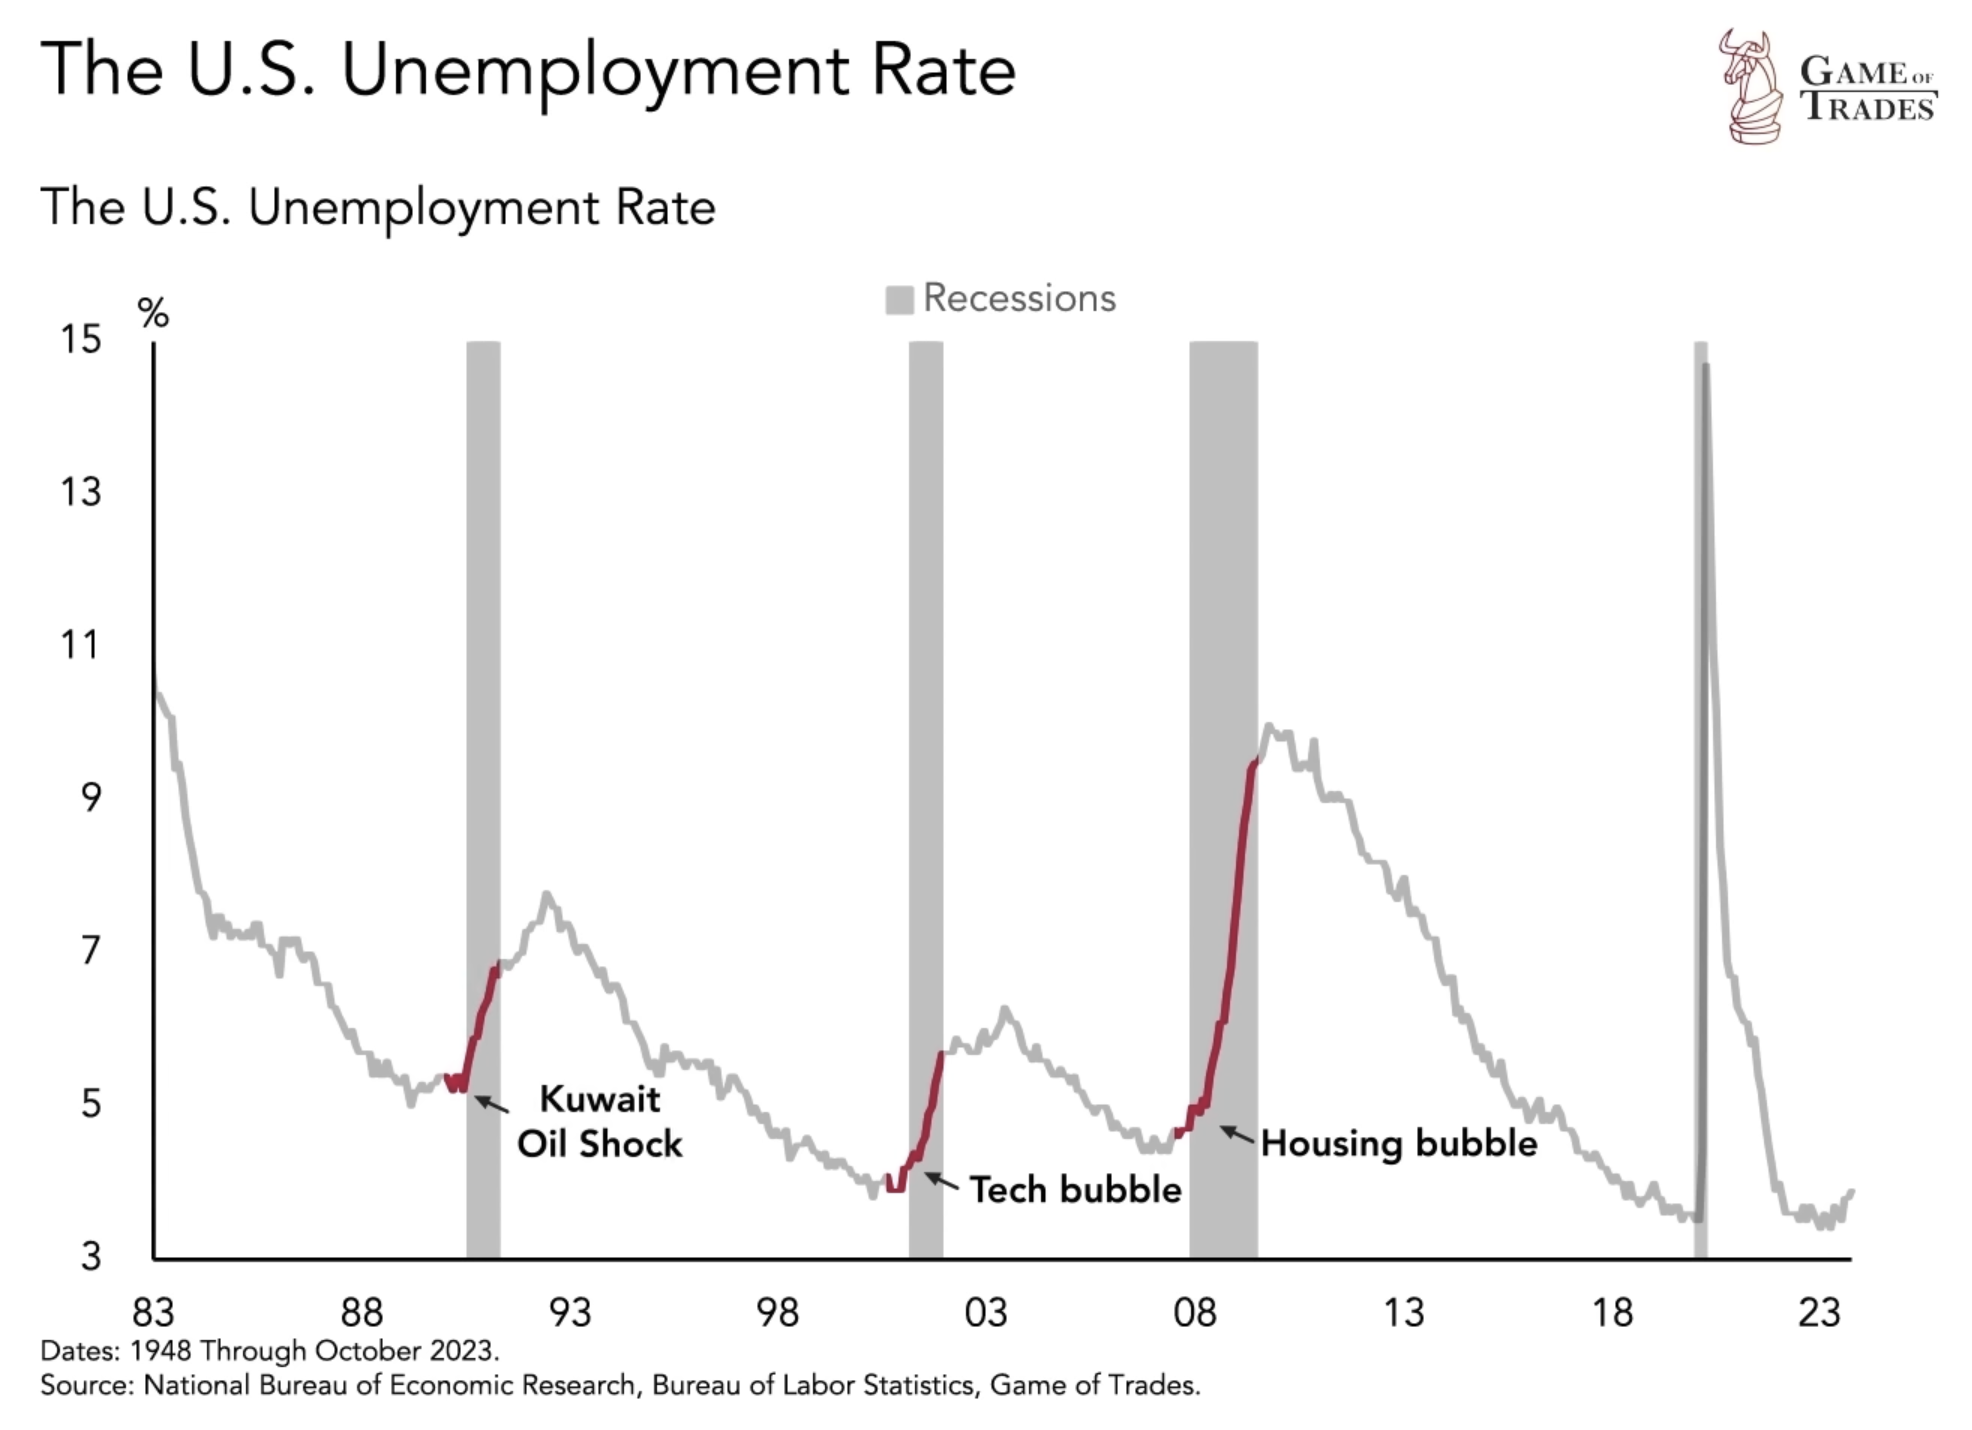 The US Unemployment Rate